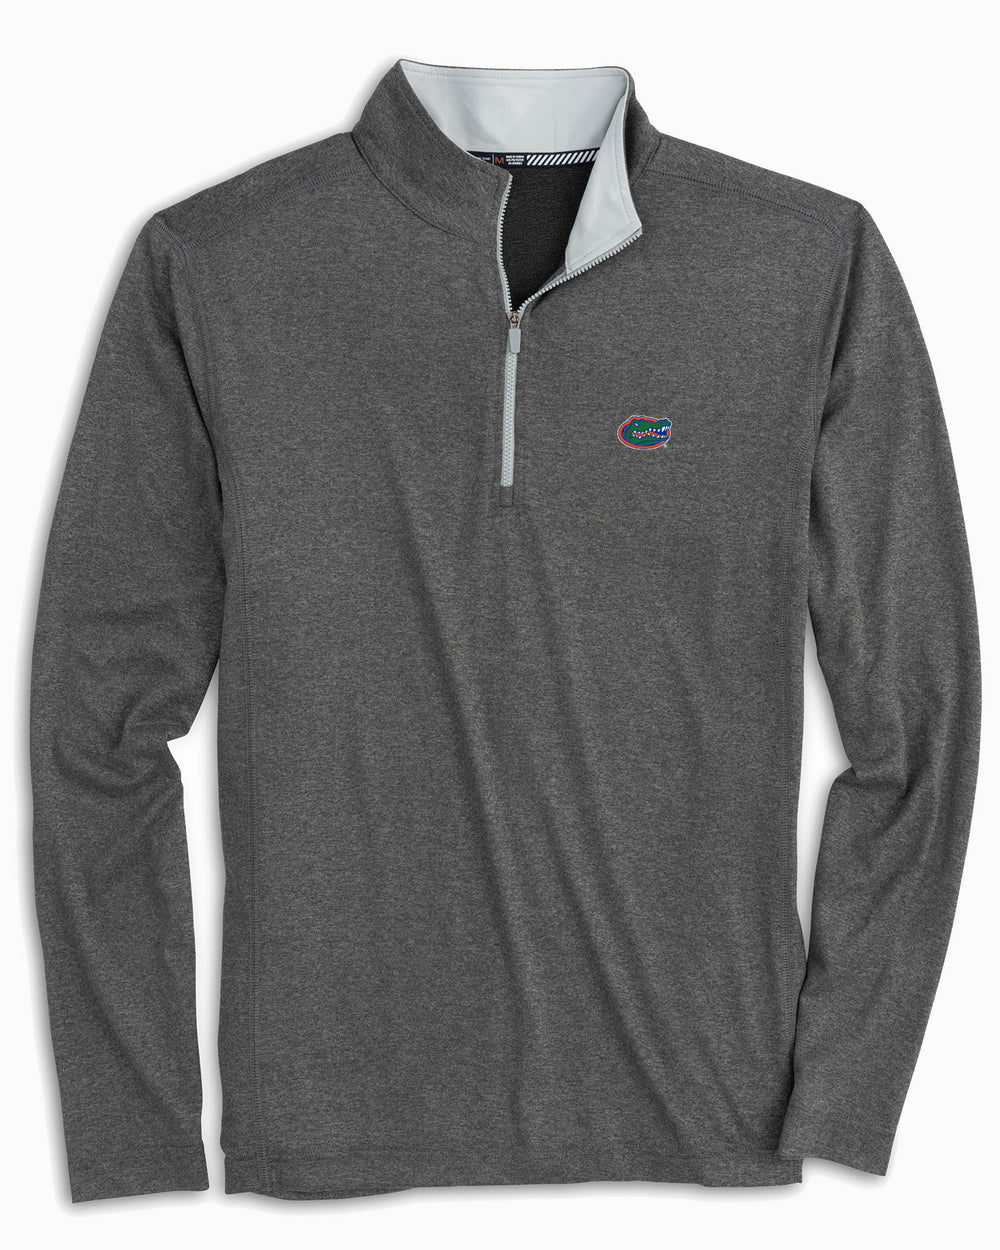 The front view of the Men's University of Florida Flanker Quarter Zip Pullover by Southern Tide - Heather Polarized Grey